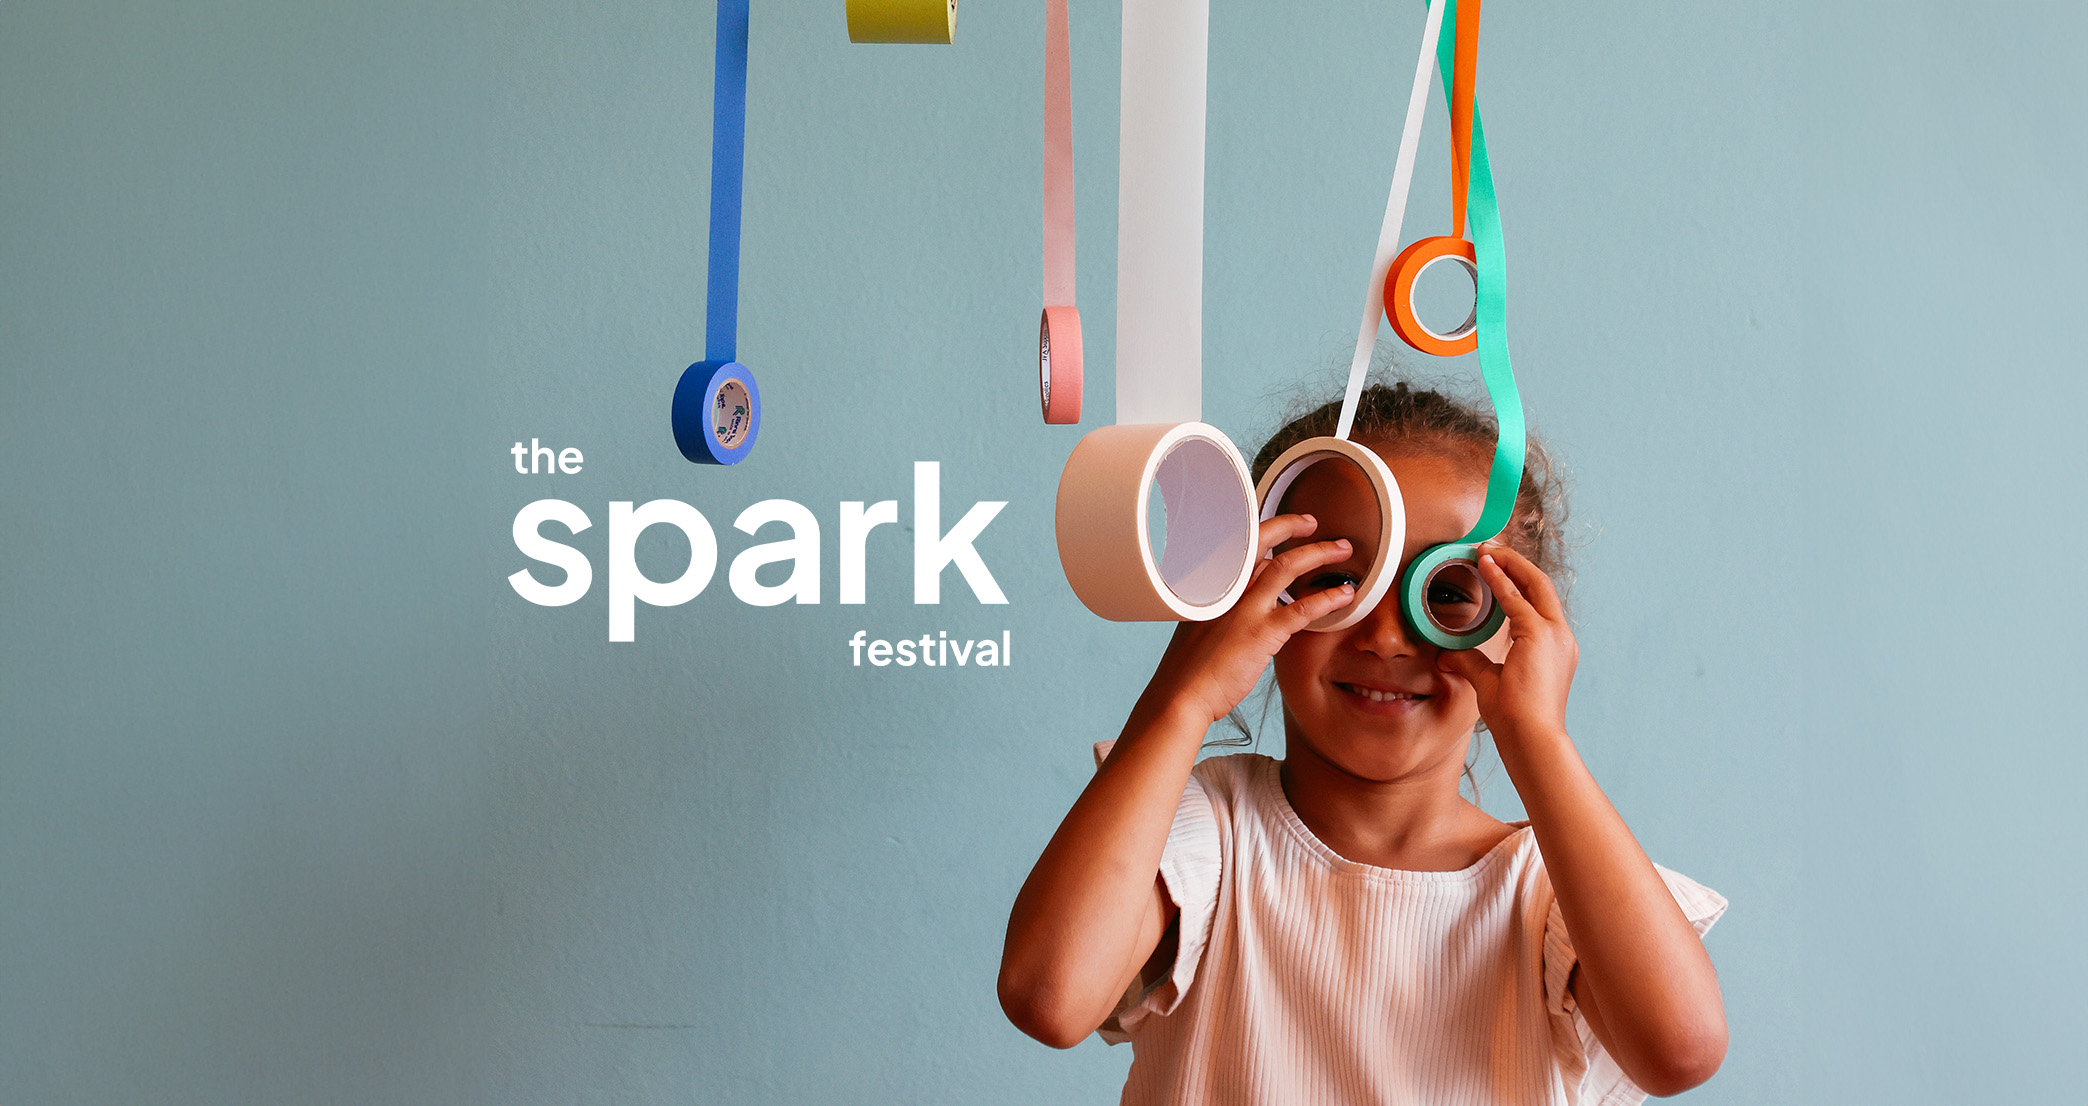 21st ANNUAL SPARK FESTIVAL CALLS ON KIDS TO ‘GIVE IT A GO’ THIS MAY IN LEICESTER